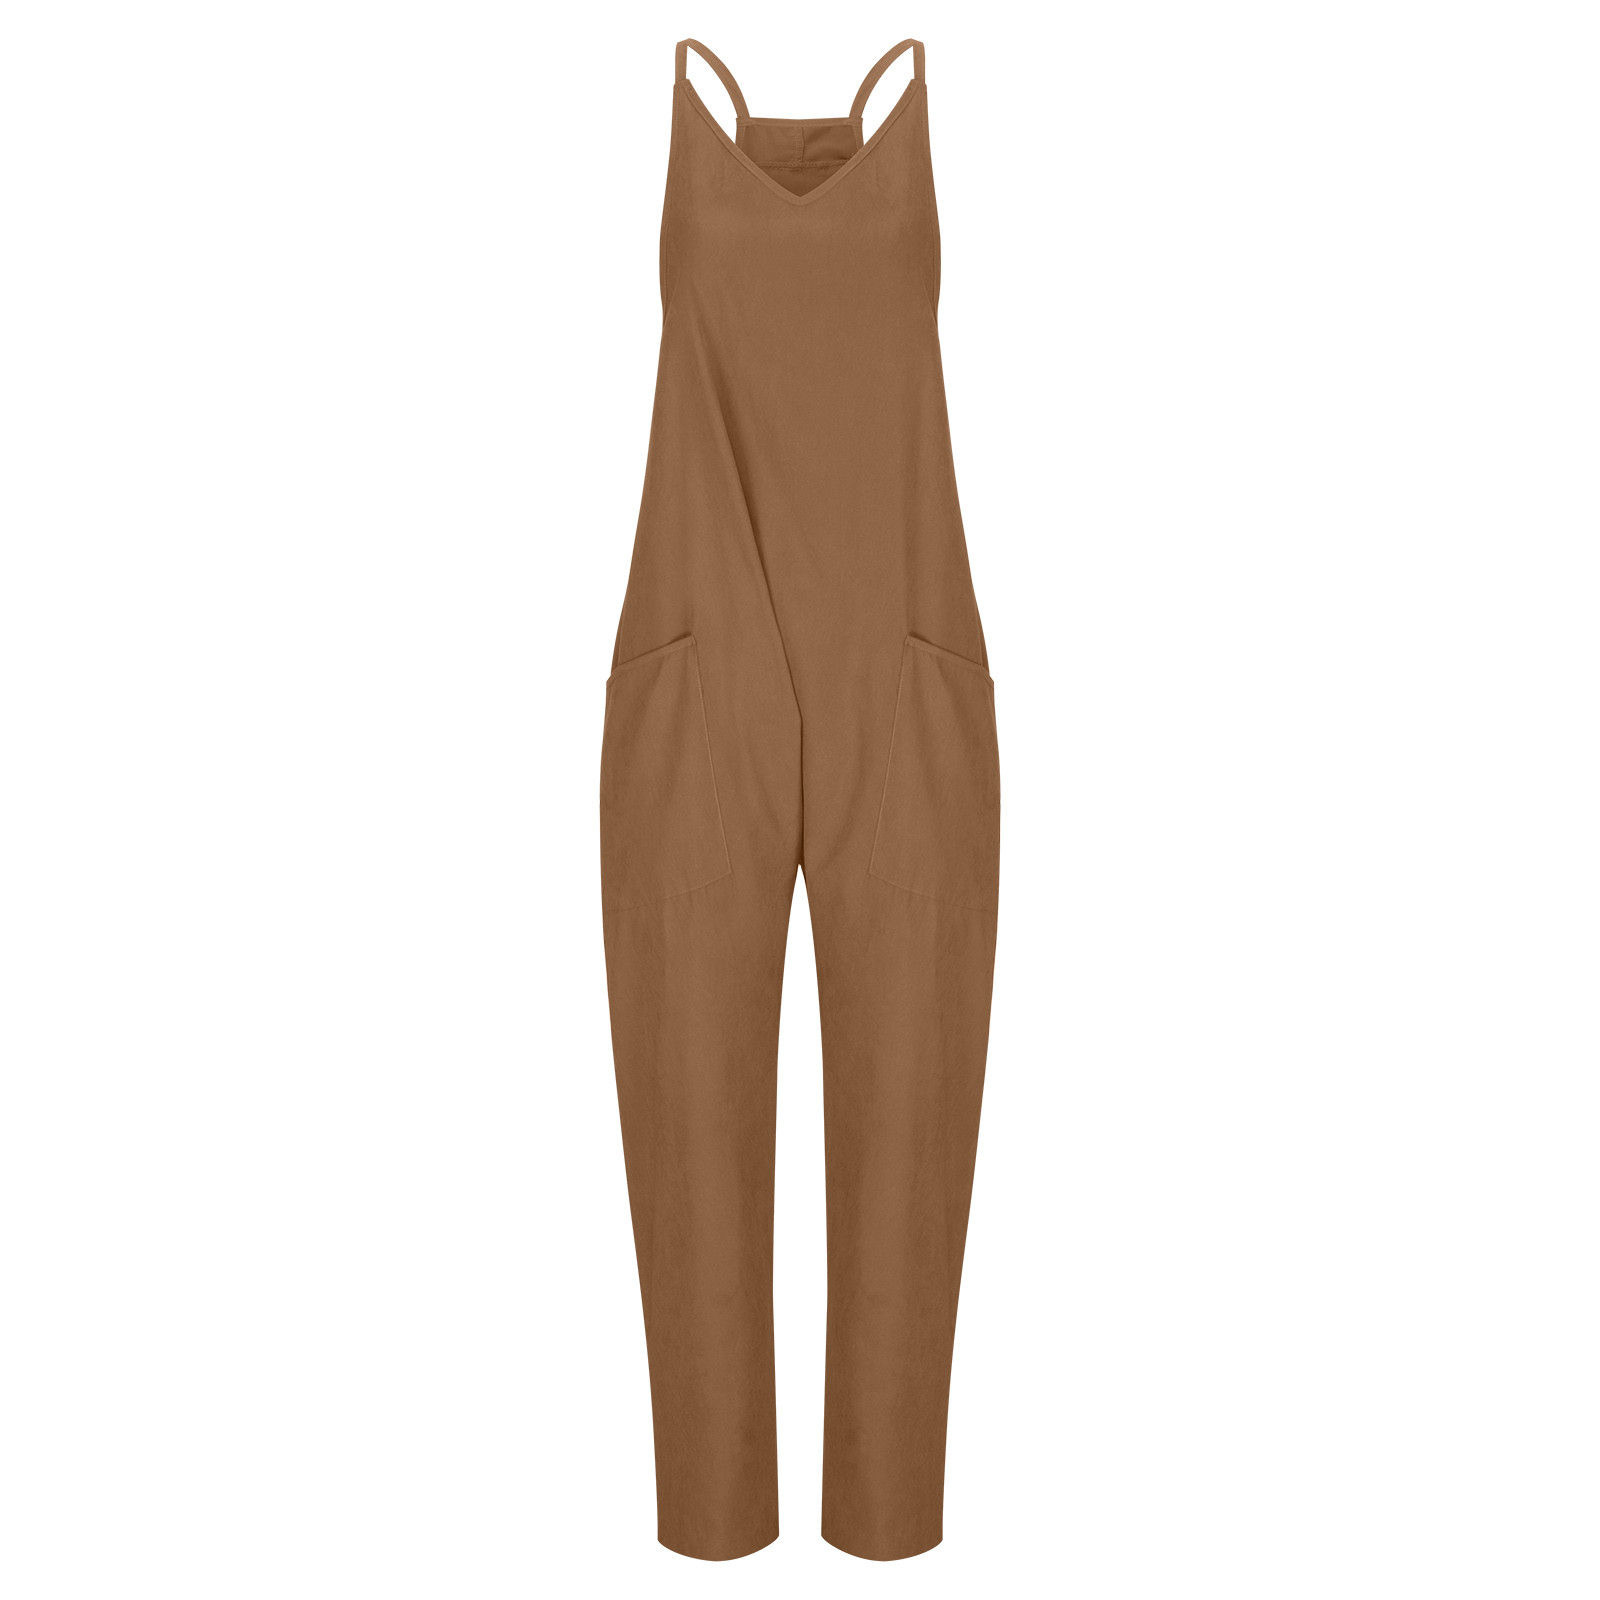 aoksee Women's Loose Casual V Neck Sleeveless Jumpsuits Spaghetti Straps Long Pants Overalls With Pockets - image 3 of 5